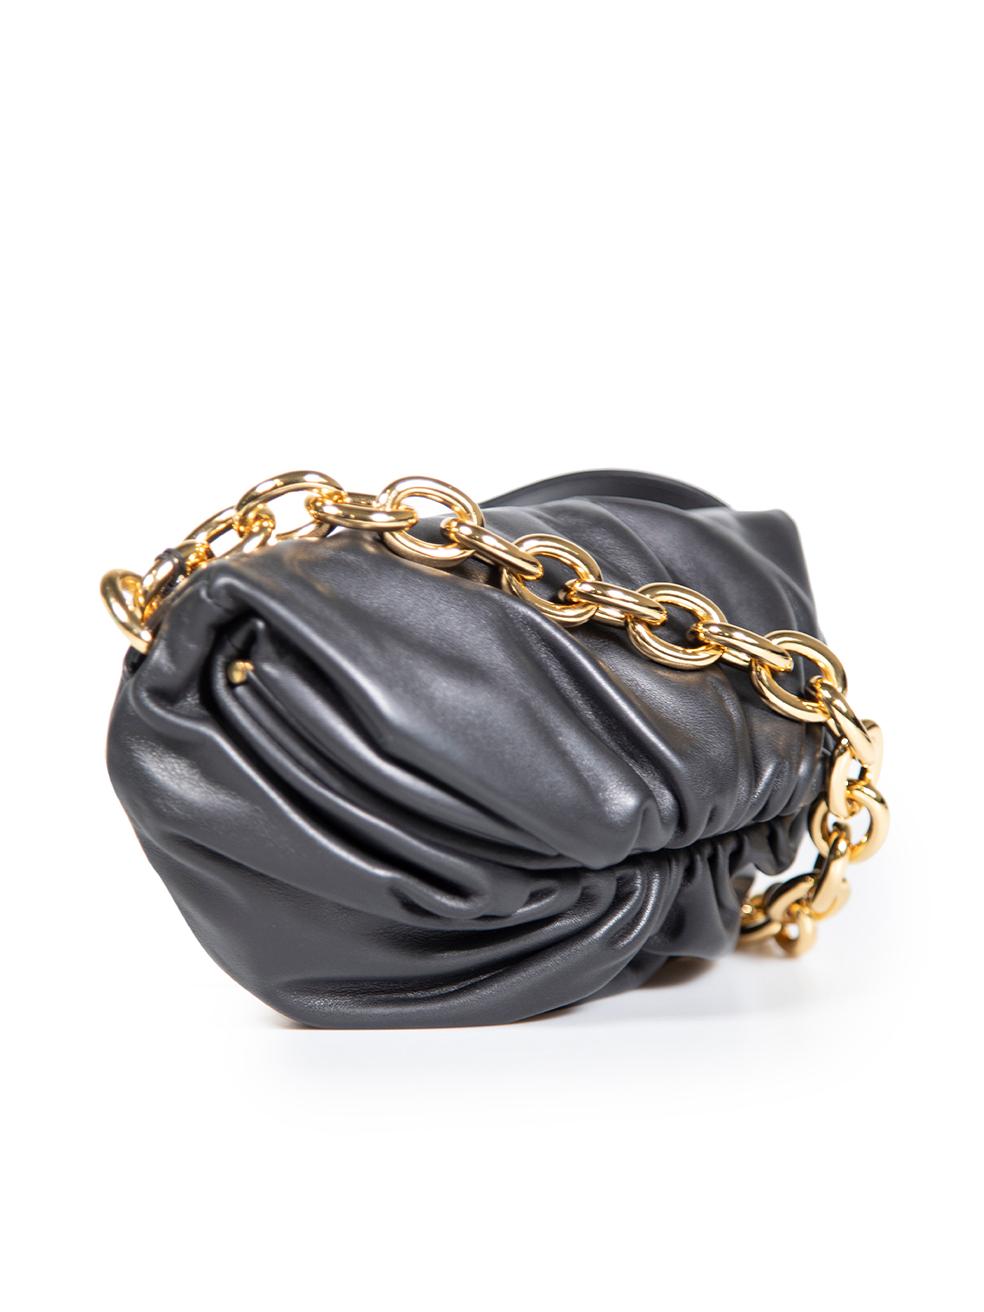 CONDITION is Never worn, with tags. No visible wear to bag is evident however minor indentation marks are found on the top of this new Bottega Veneta designer resale item. Comes with original dust bag.
 
 Details
 Chain Pouch 
 Black
 Leather
 Mini